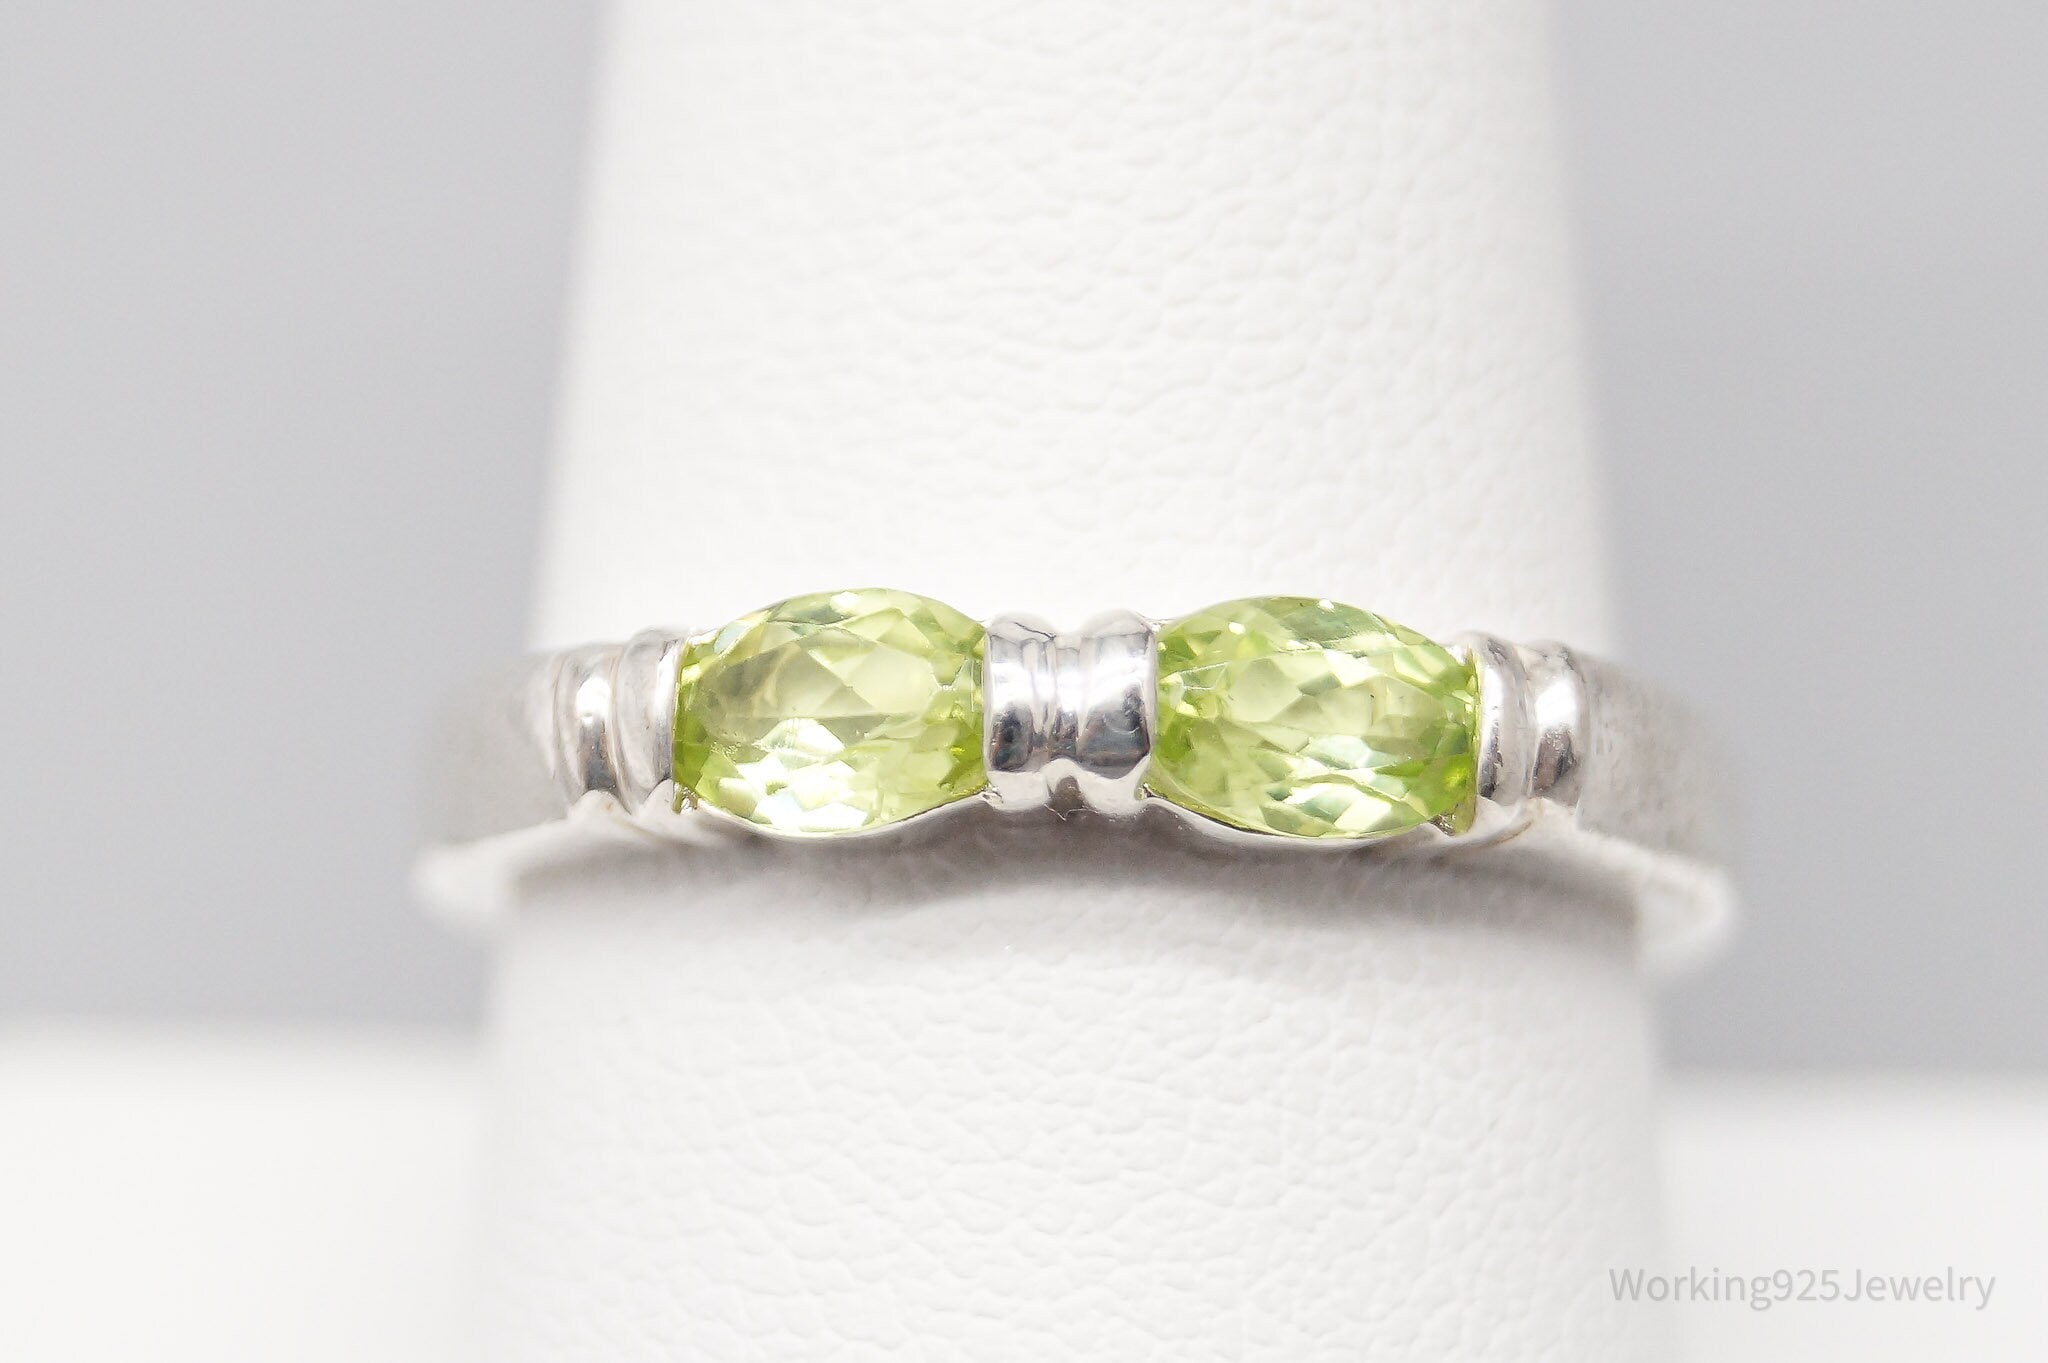 Vintage Peridot Sterling Silver Ring - Size 9